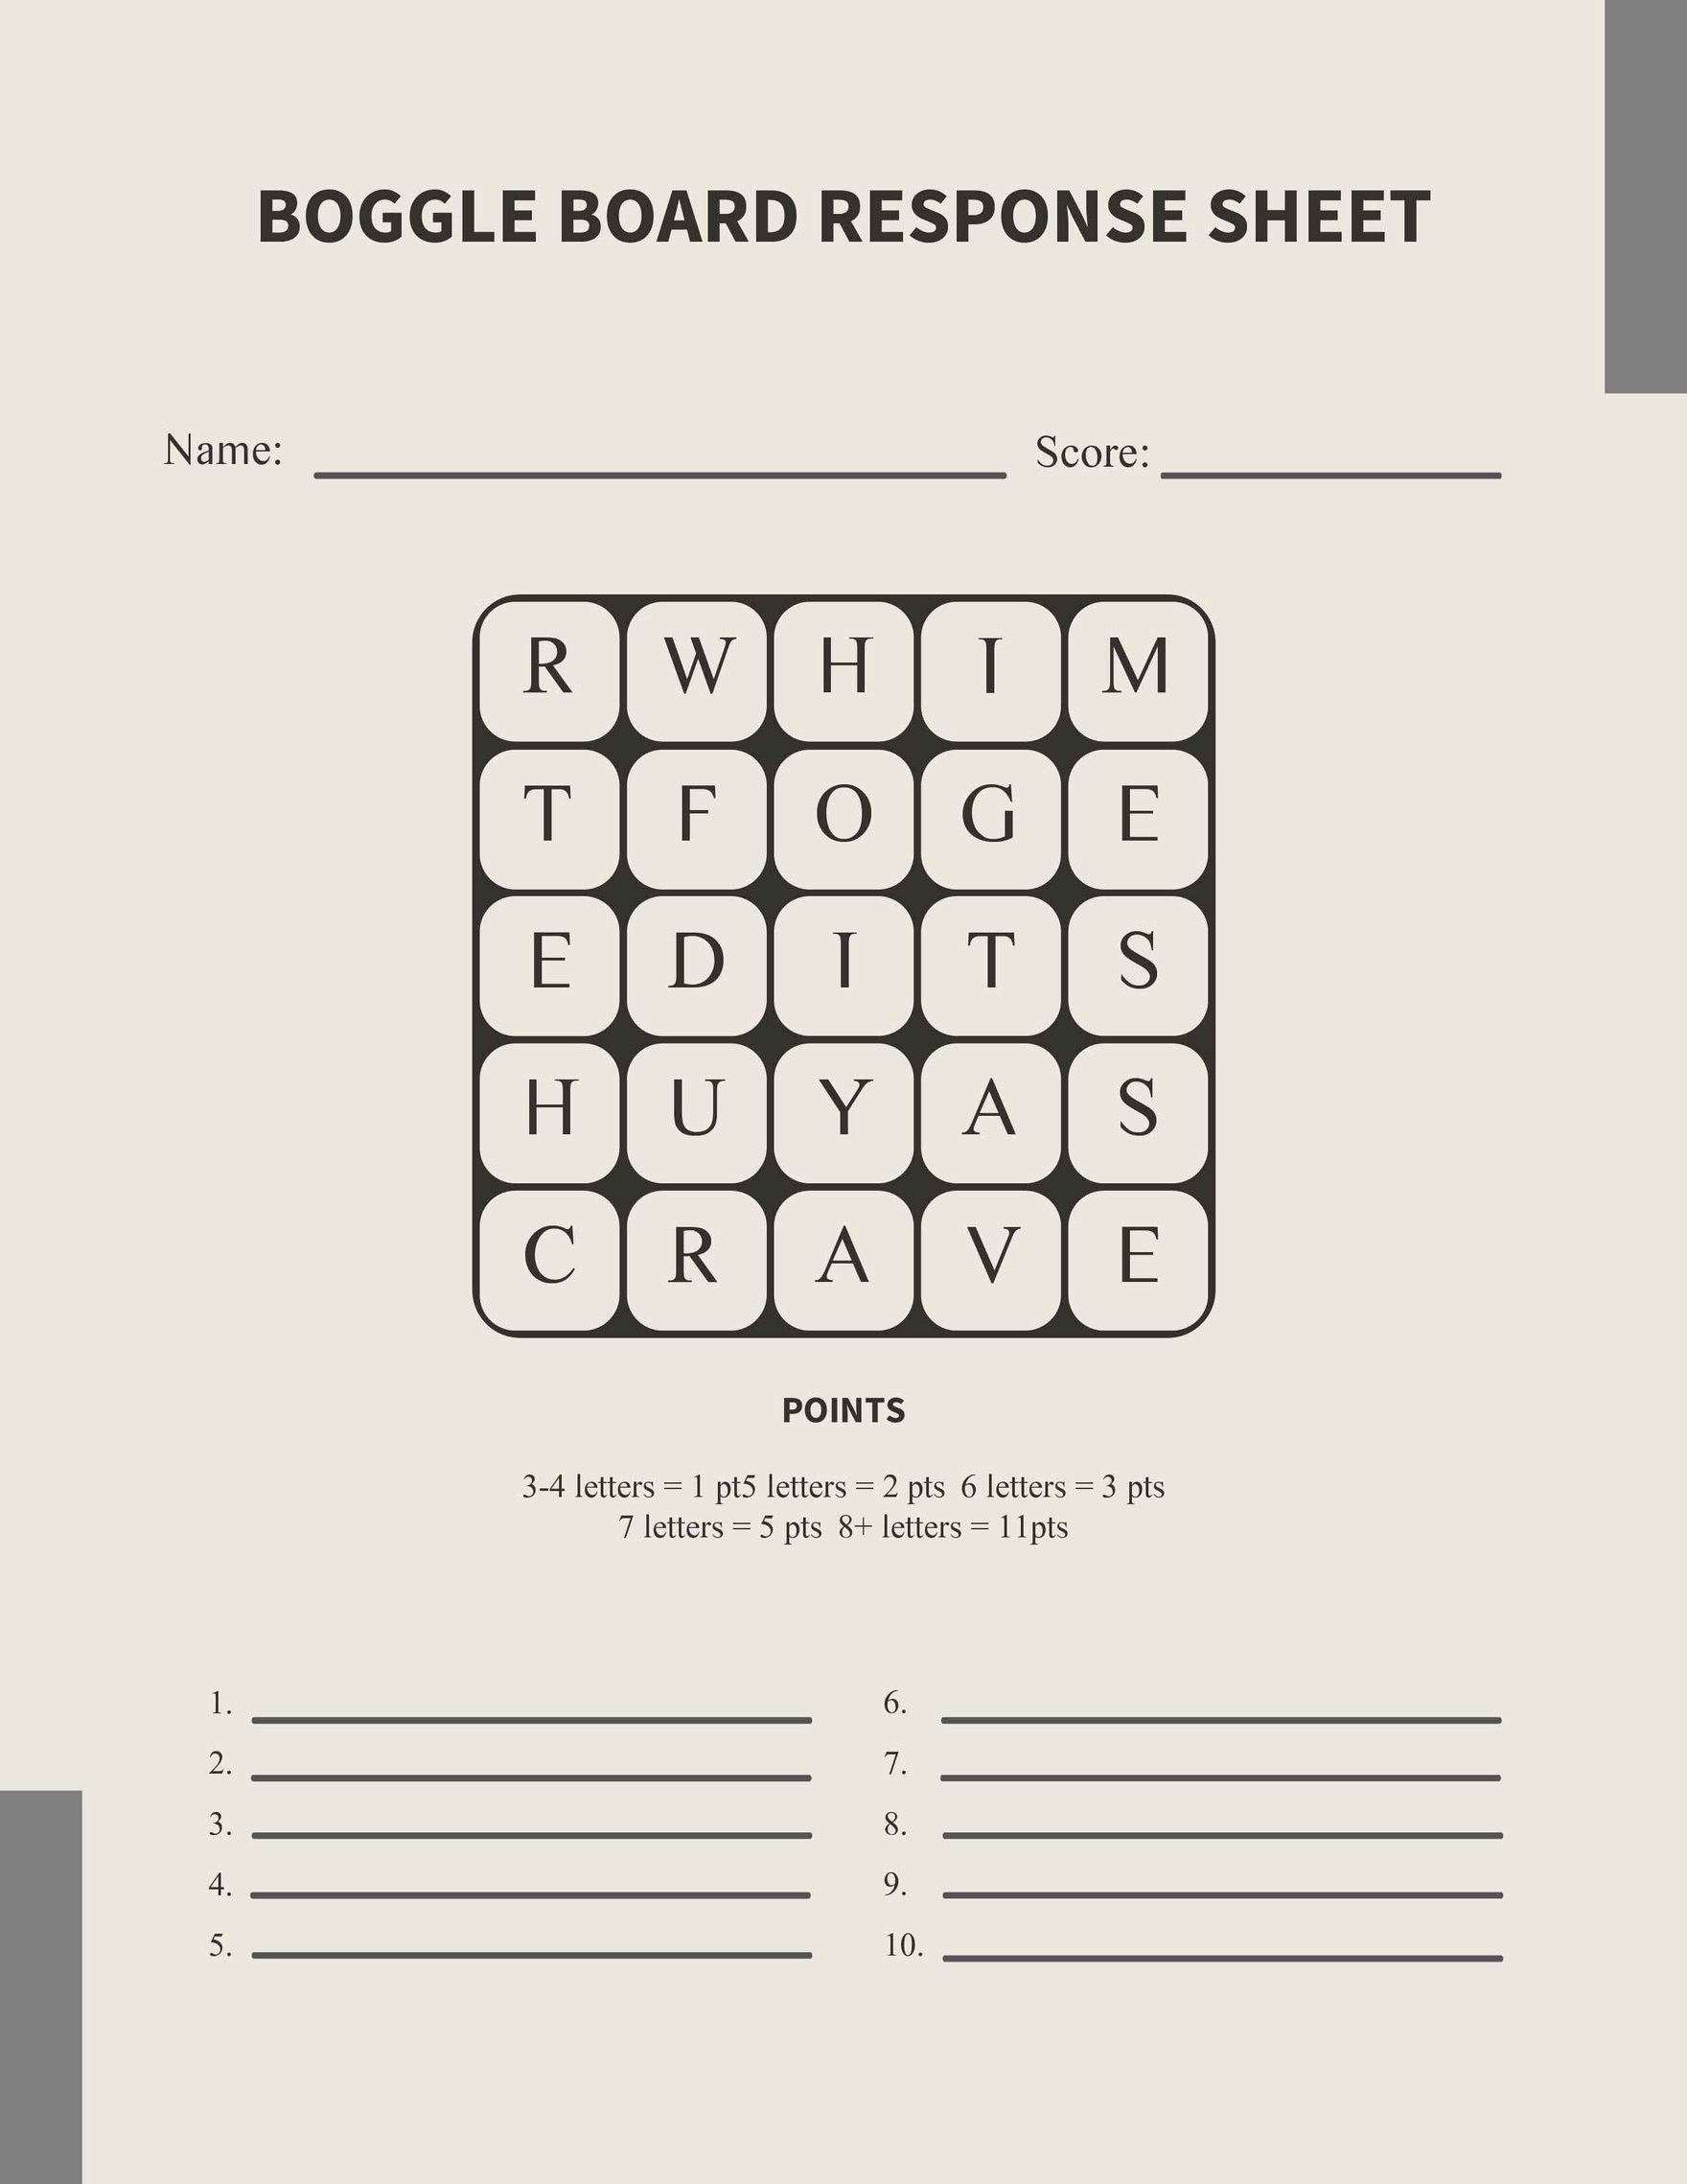 Boggle Board Response Sheet Template in Word, Google Docs, PDF, Apple Pages